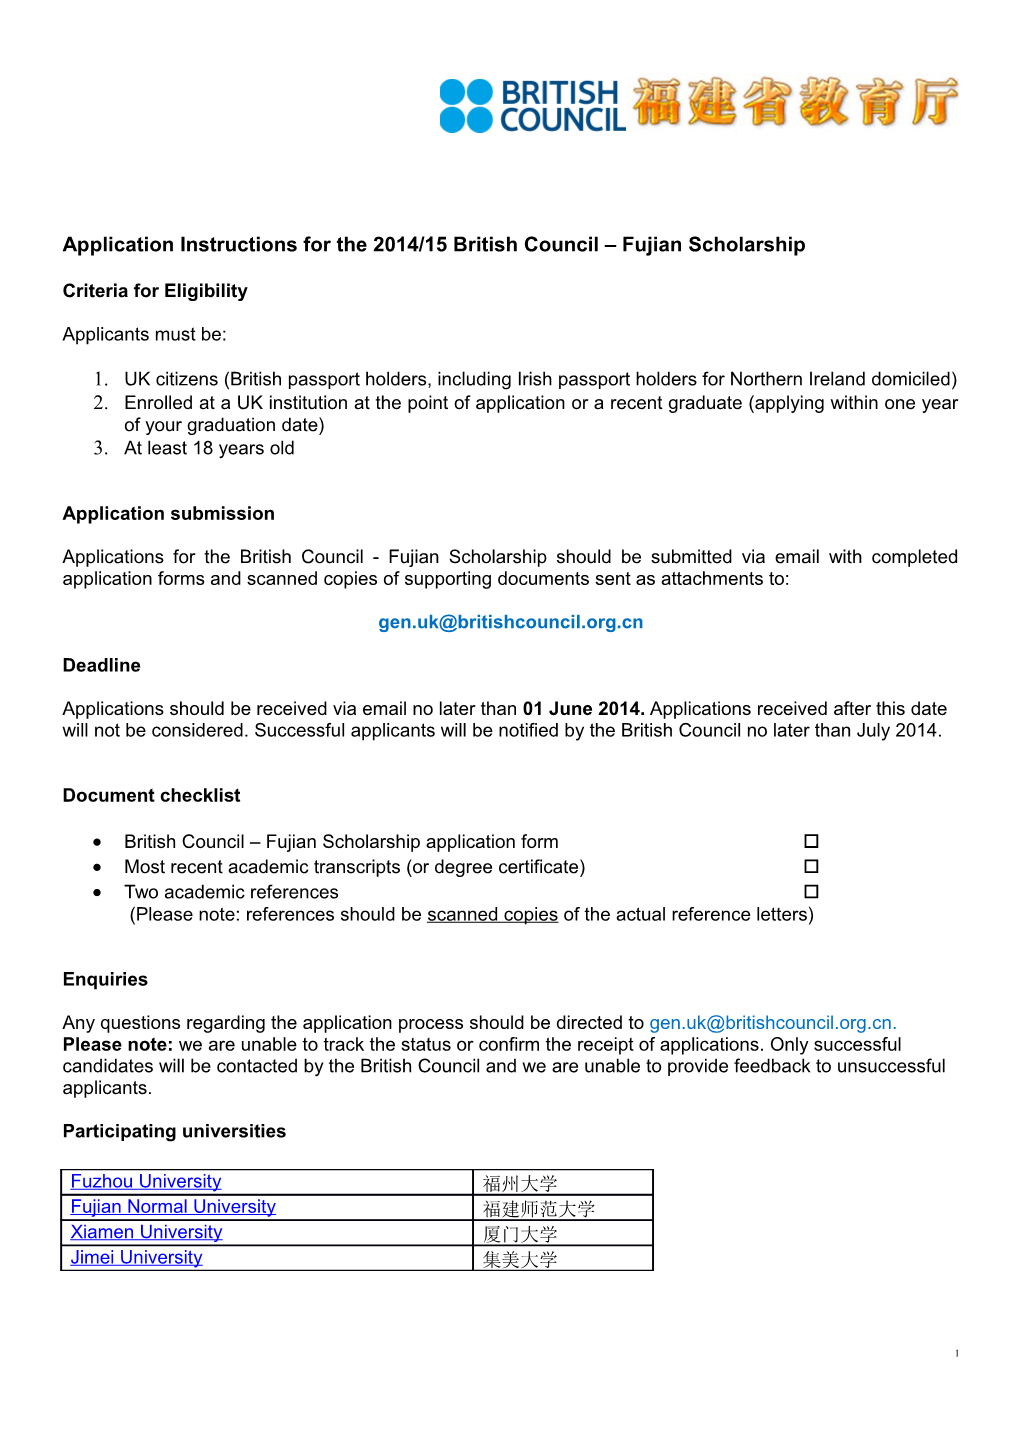 Application Instructions for the 2014/15 British Council Fujian Scholarship